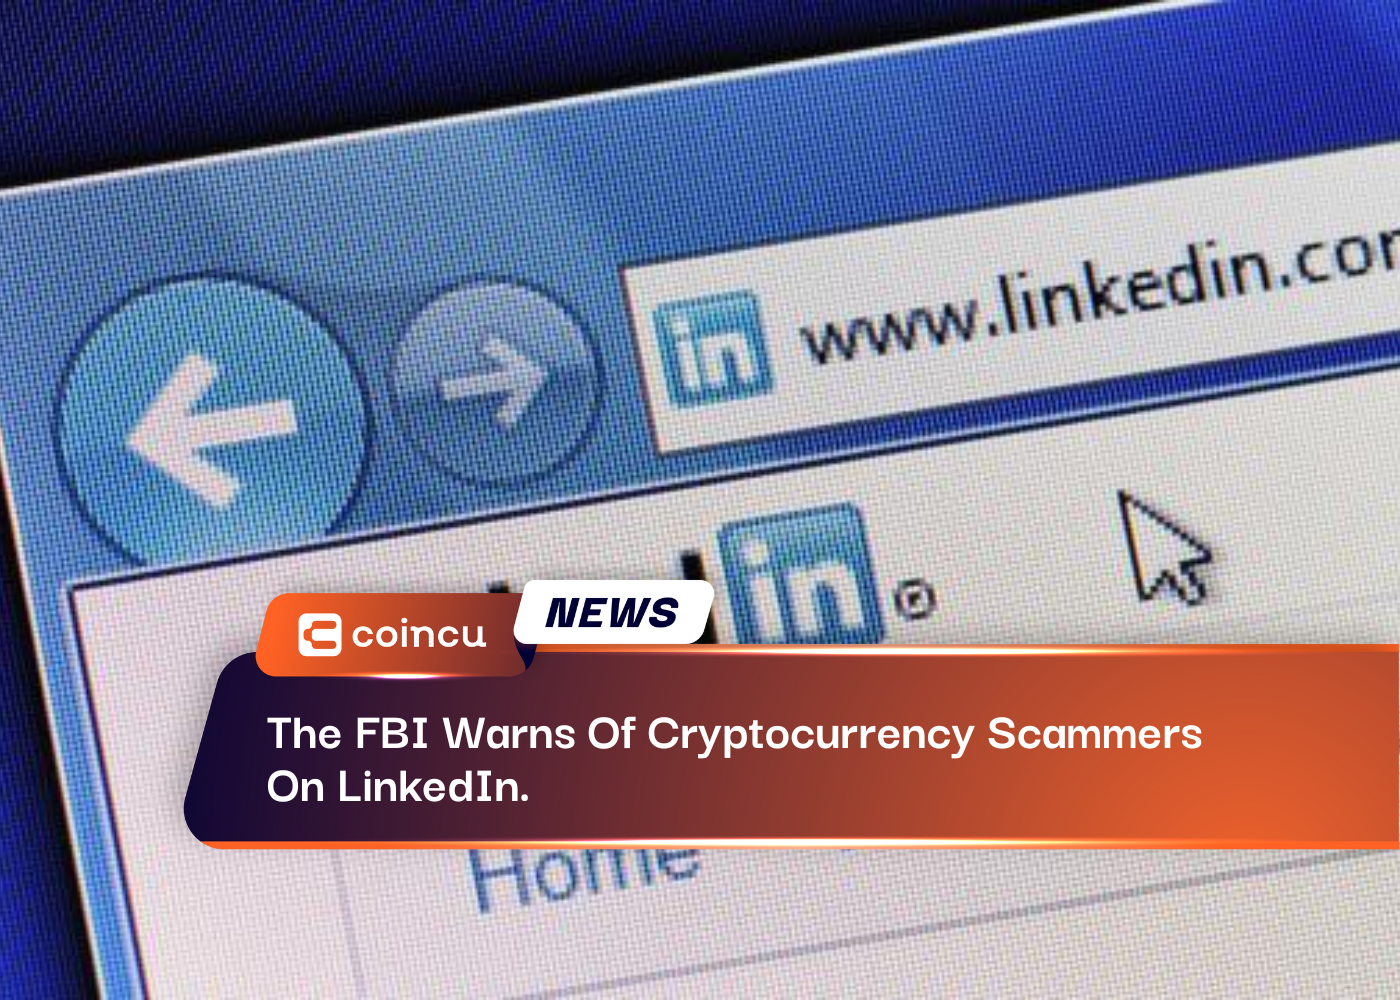 The FBI Warns Of Cryptocurrency Scammers On LinkedIn.